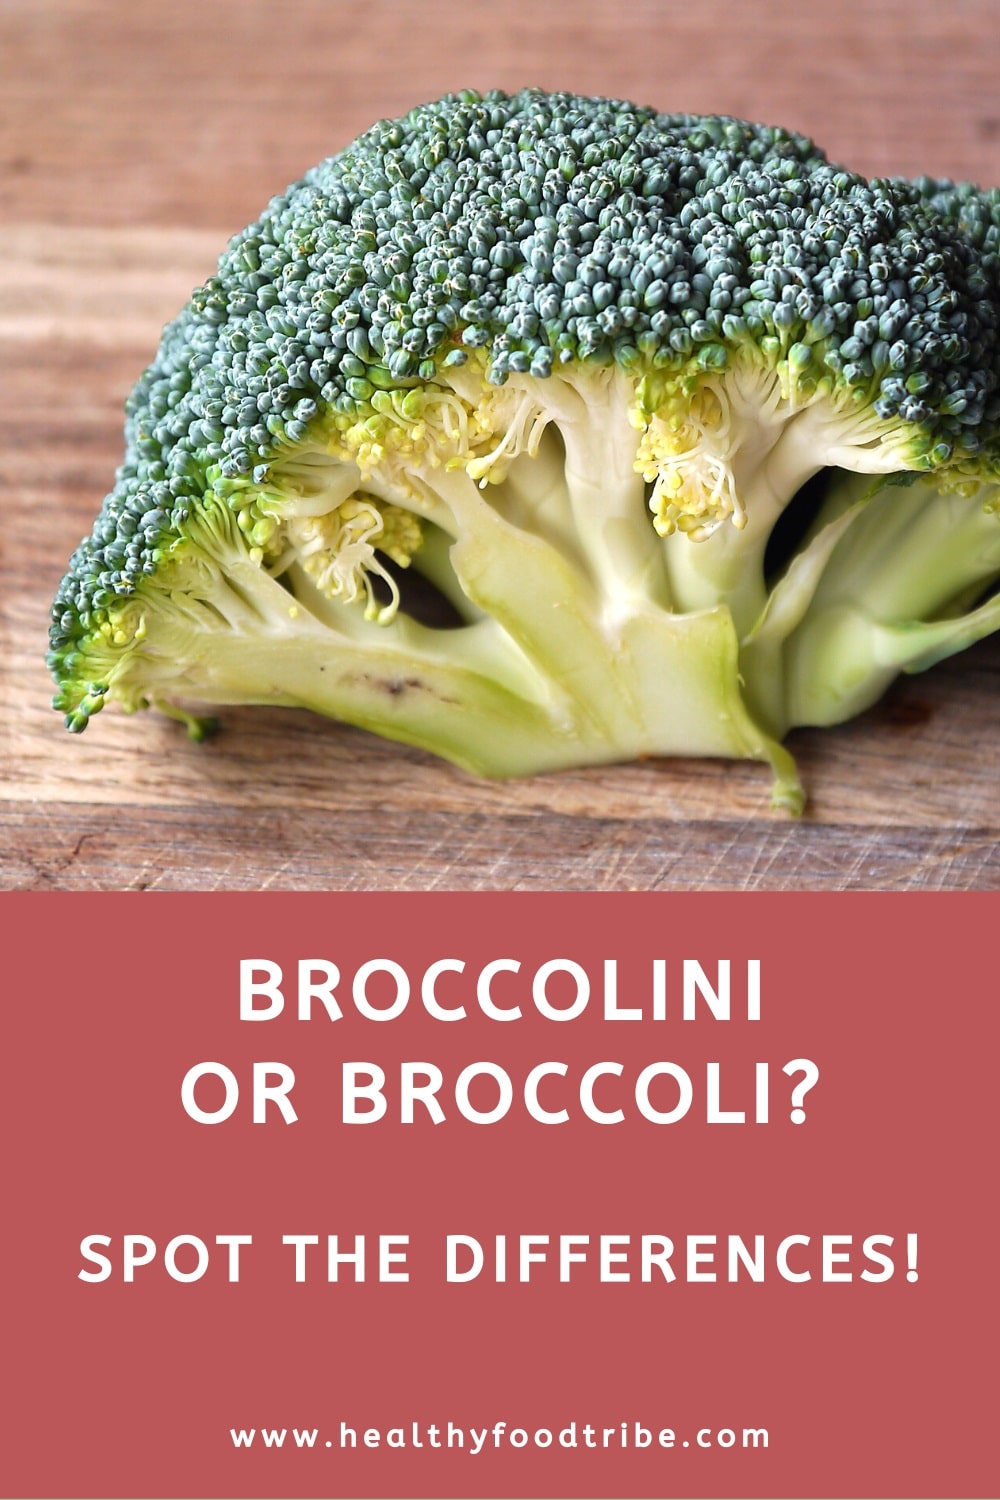 Differences between broccoli and broccolini